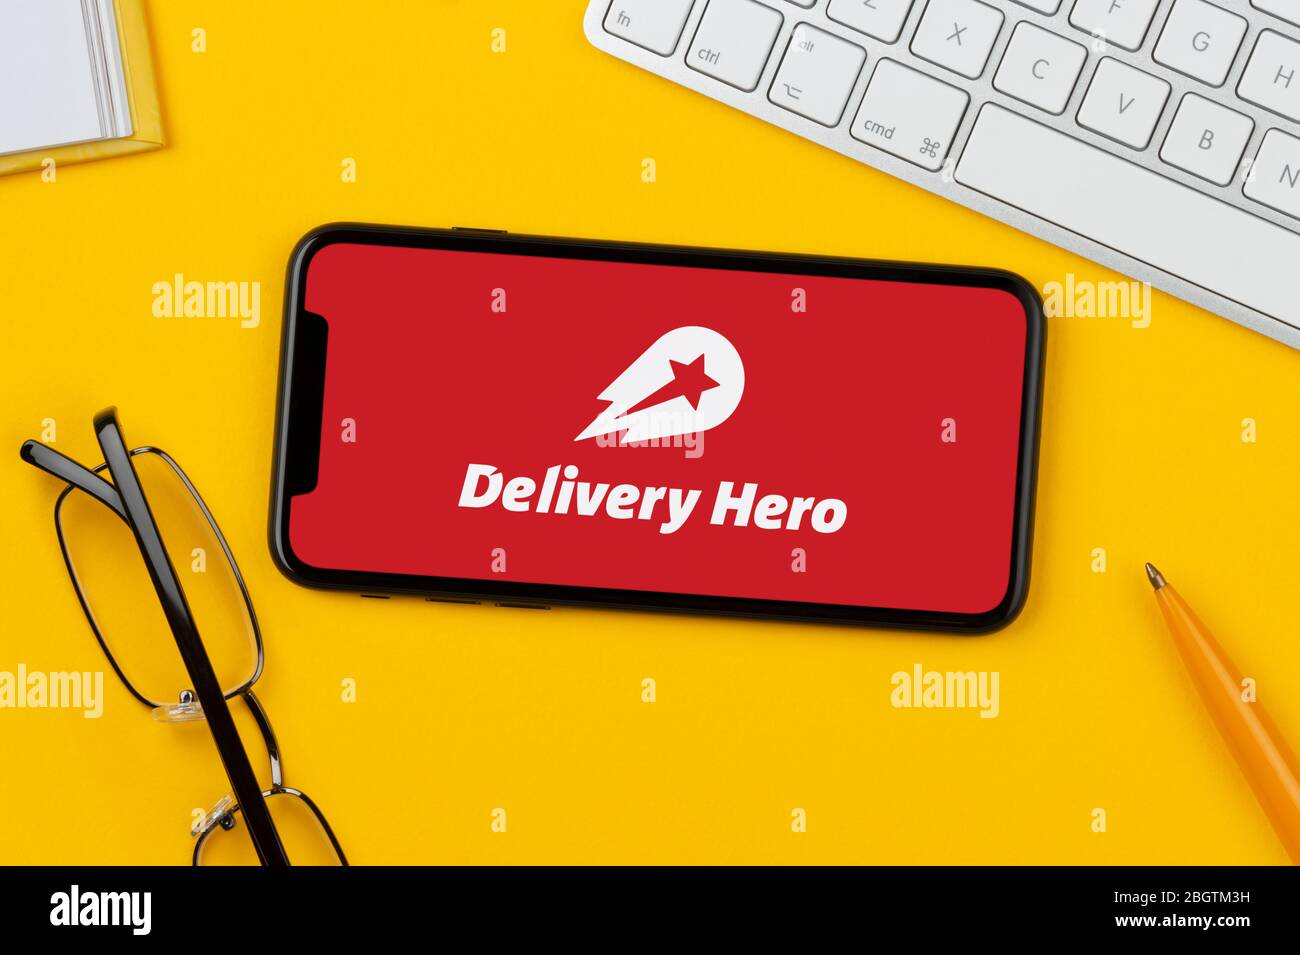 A smartphone showing the Delivery Hero logo rests on a yellow background along with a keyboard, glasses, pen and book (Editorial use only). Stock Photo